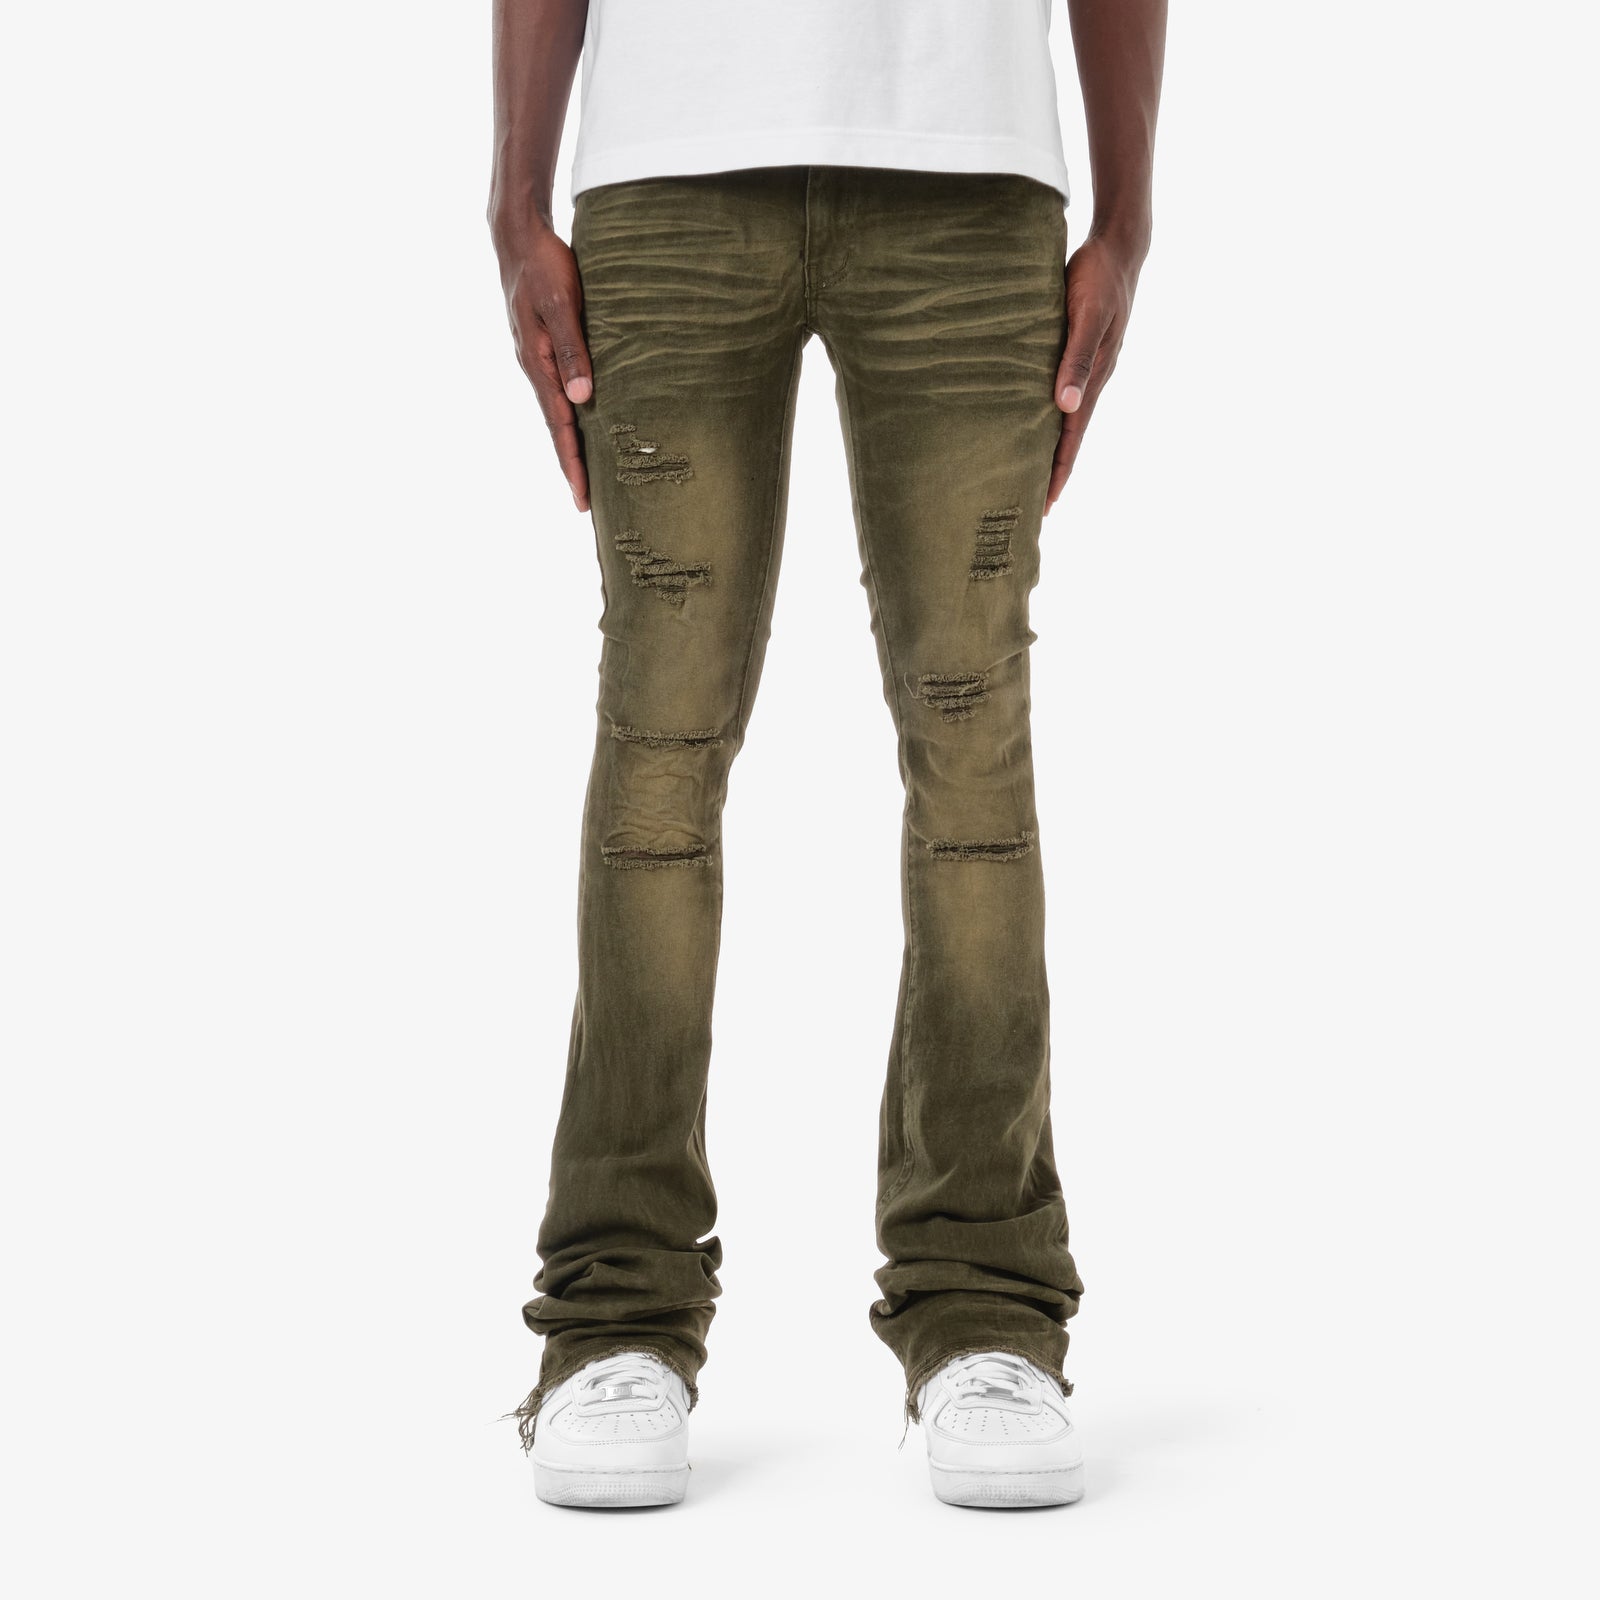 OLIVE STACKED JEANS W/ SUPER STRETCH